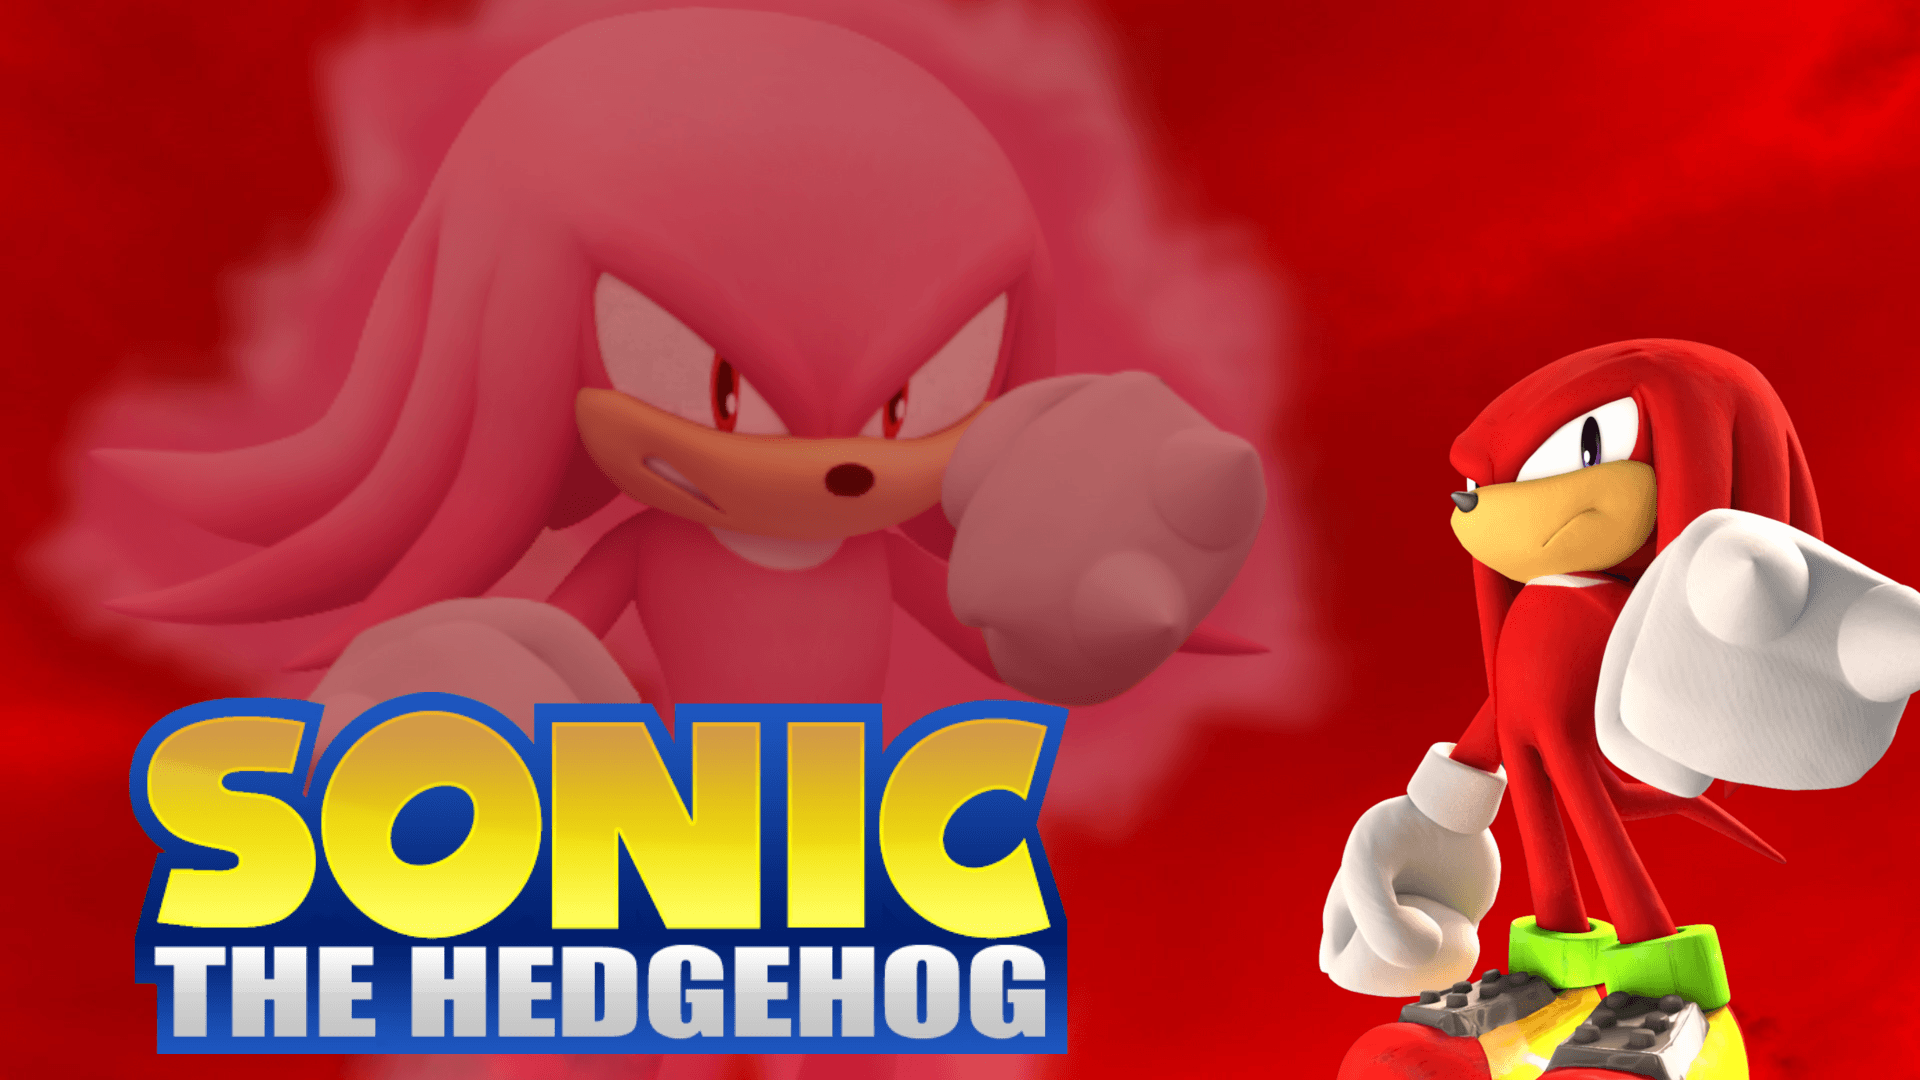 Knuckles The Echidna Wallpaper by: AxelG4m3r